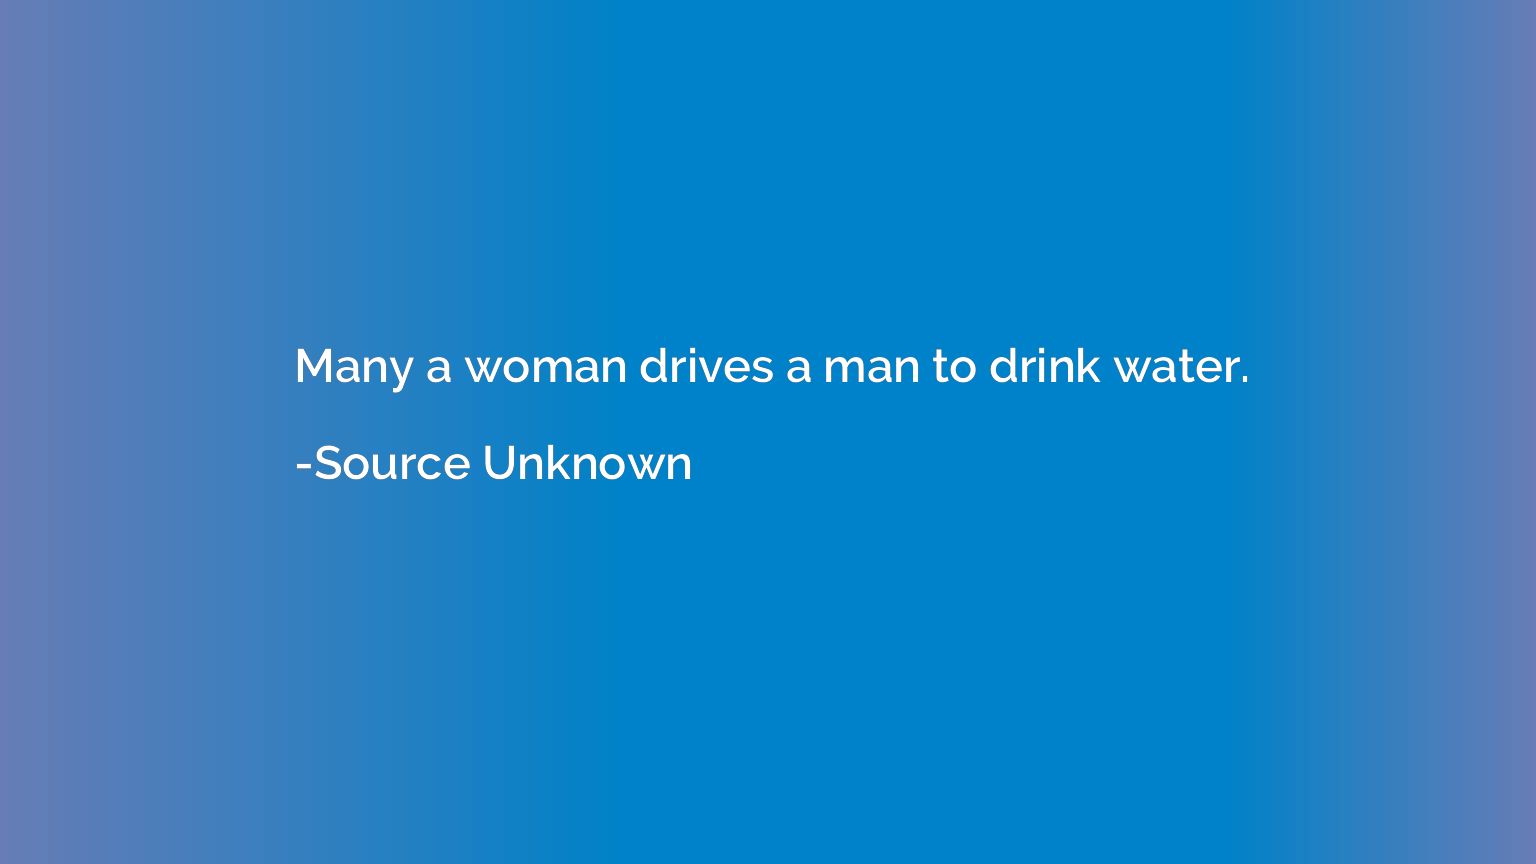 Many a woman drives a man to drink water.